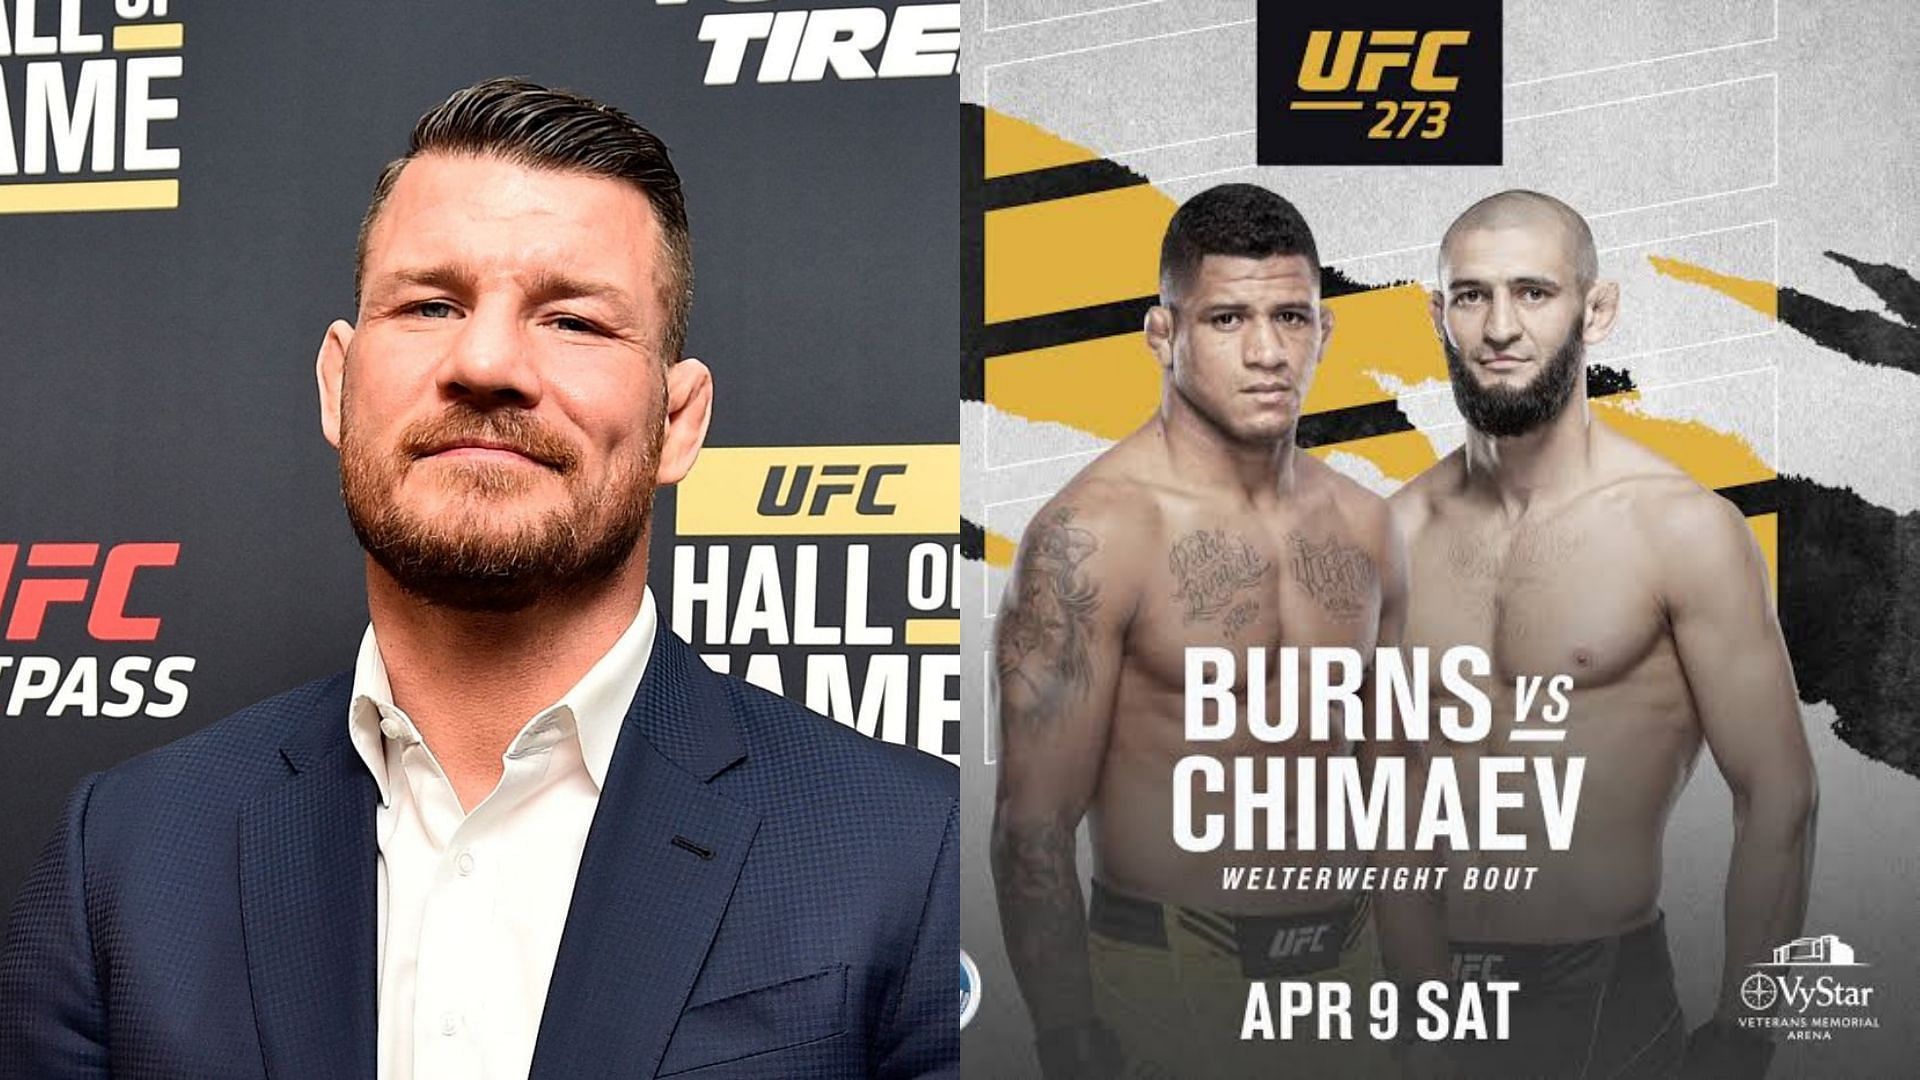 Michael Bisping has given his prediction for Chimaev vs. Burns